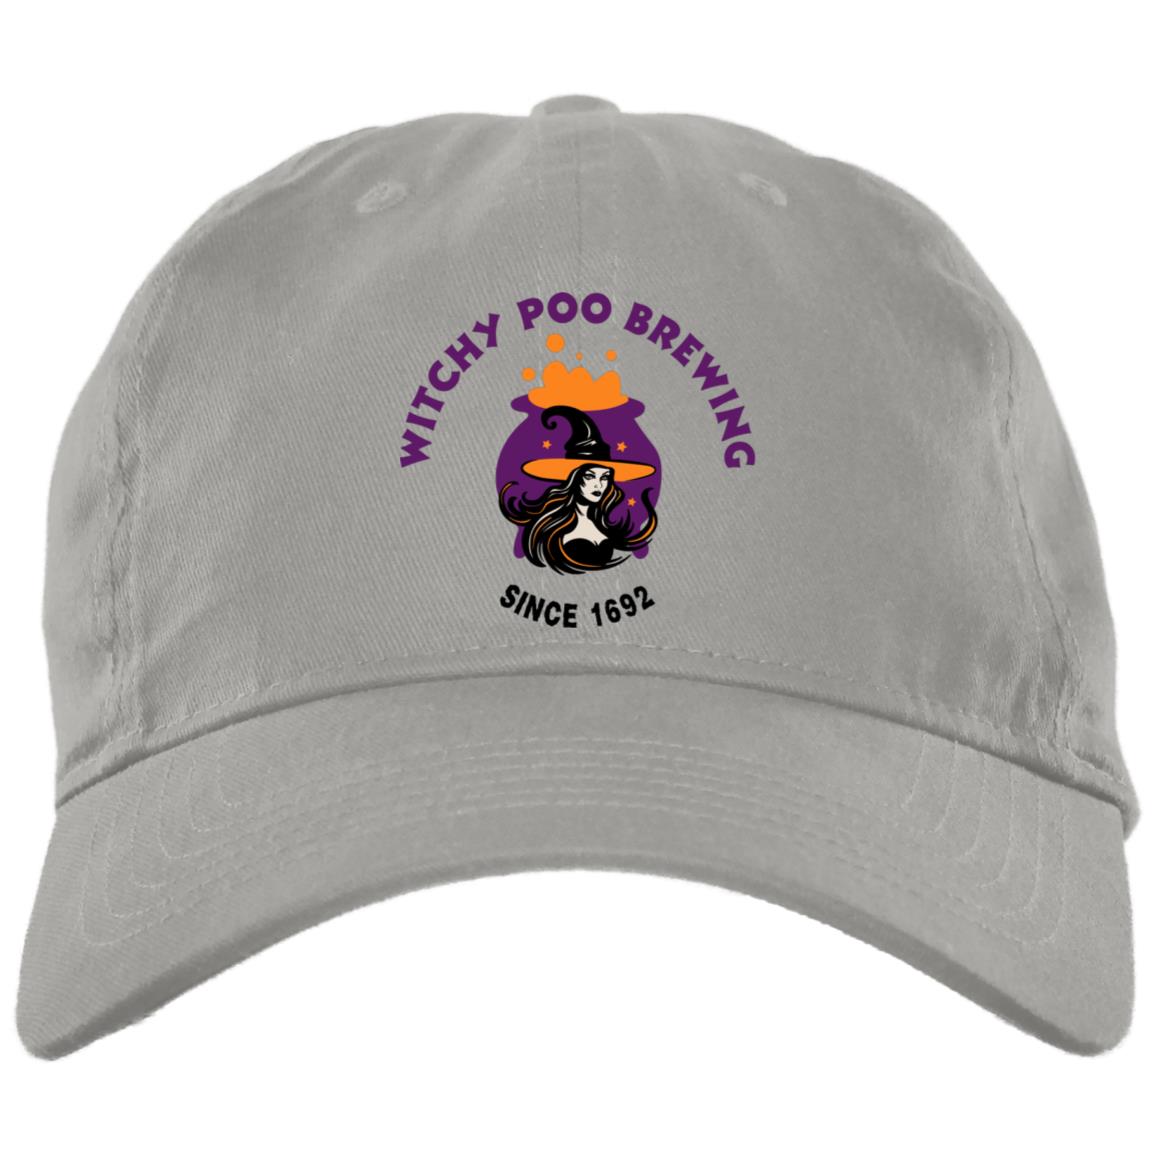 witchy POO Brewing T Shirt Witchy Poo Brewing Since 1692 Unstructured Dad Cap